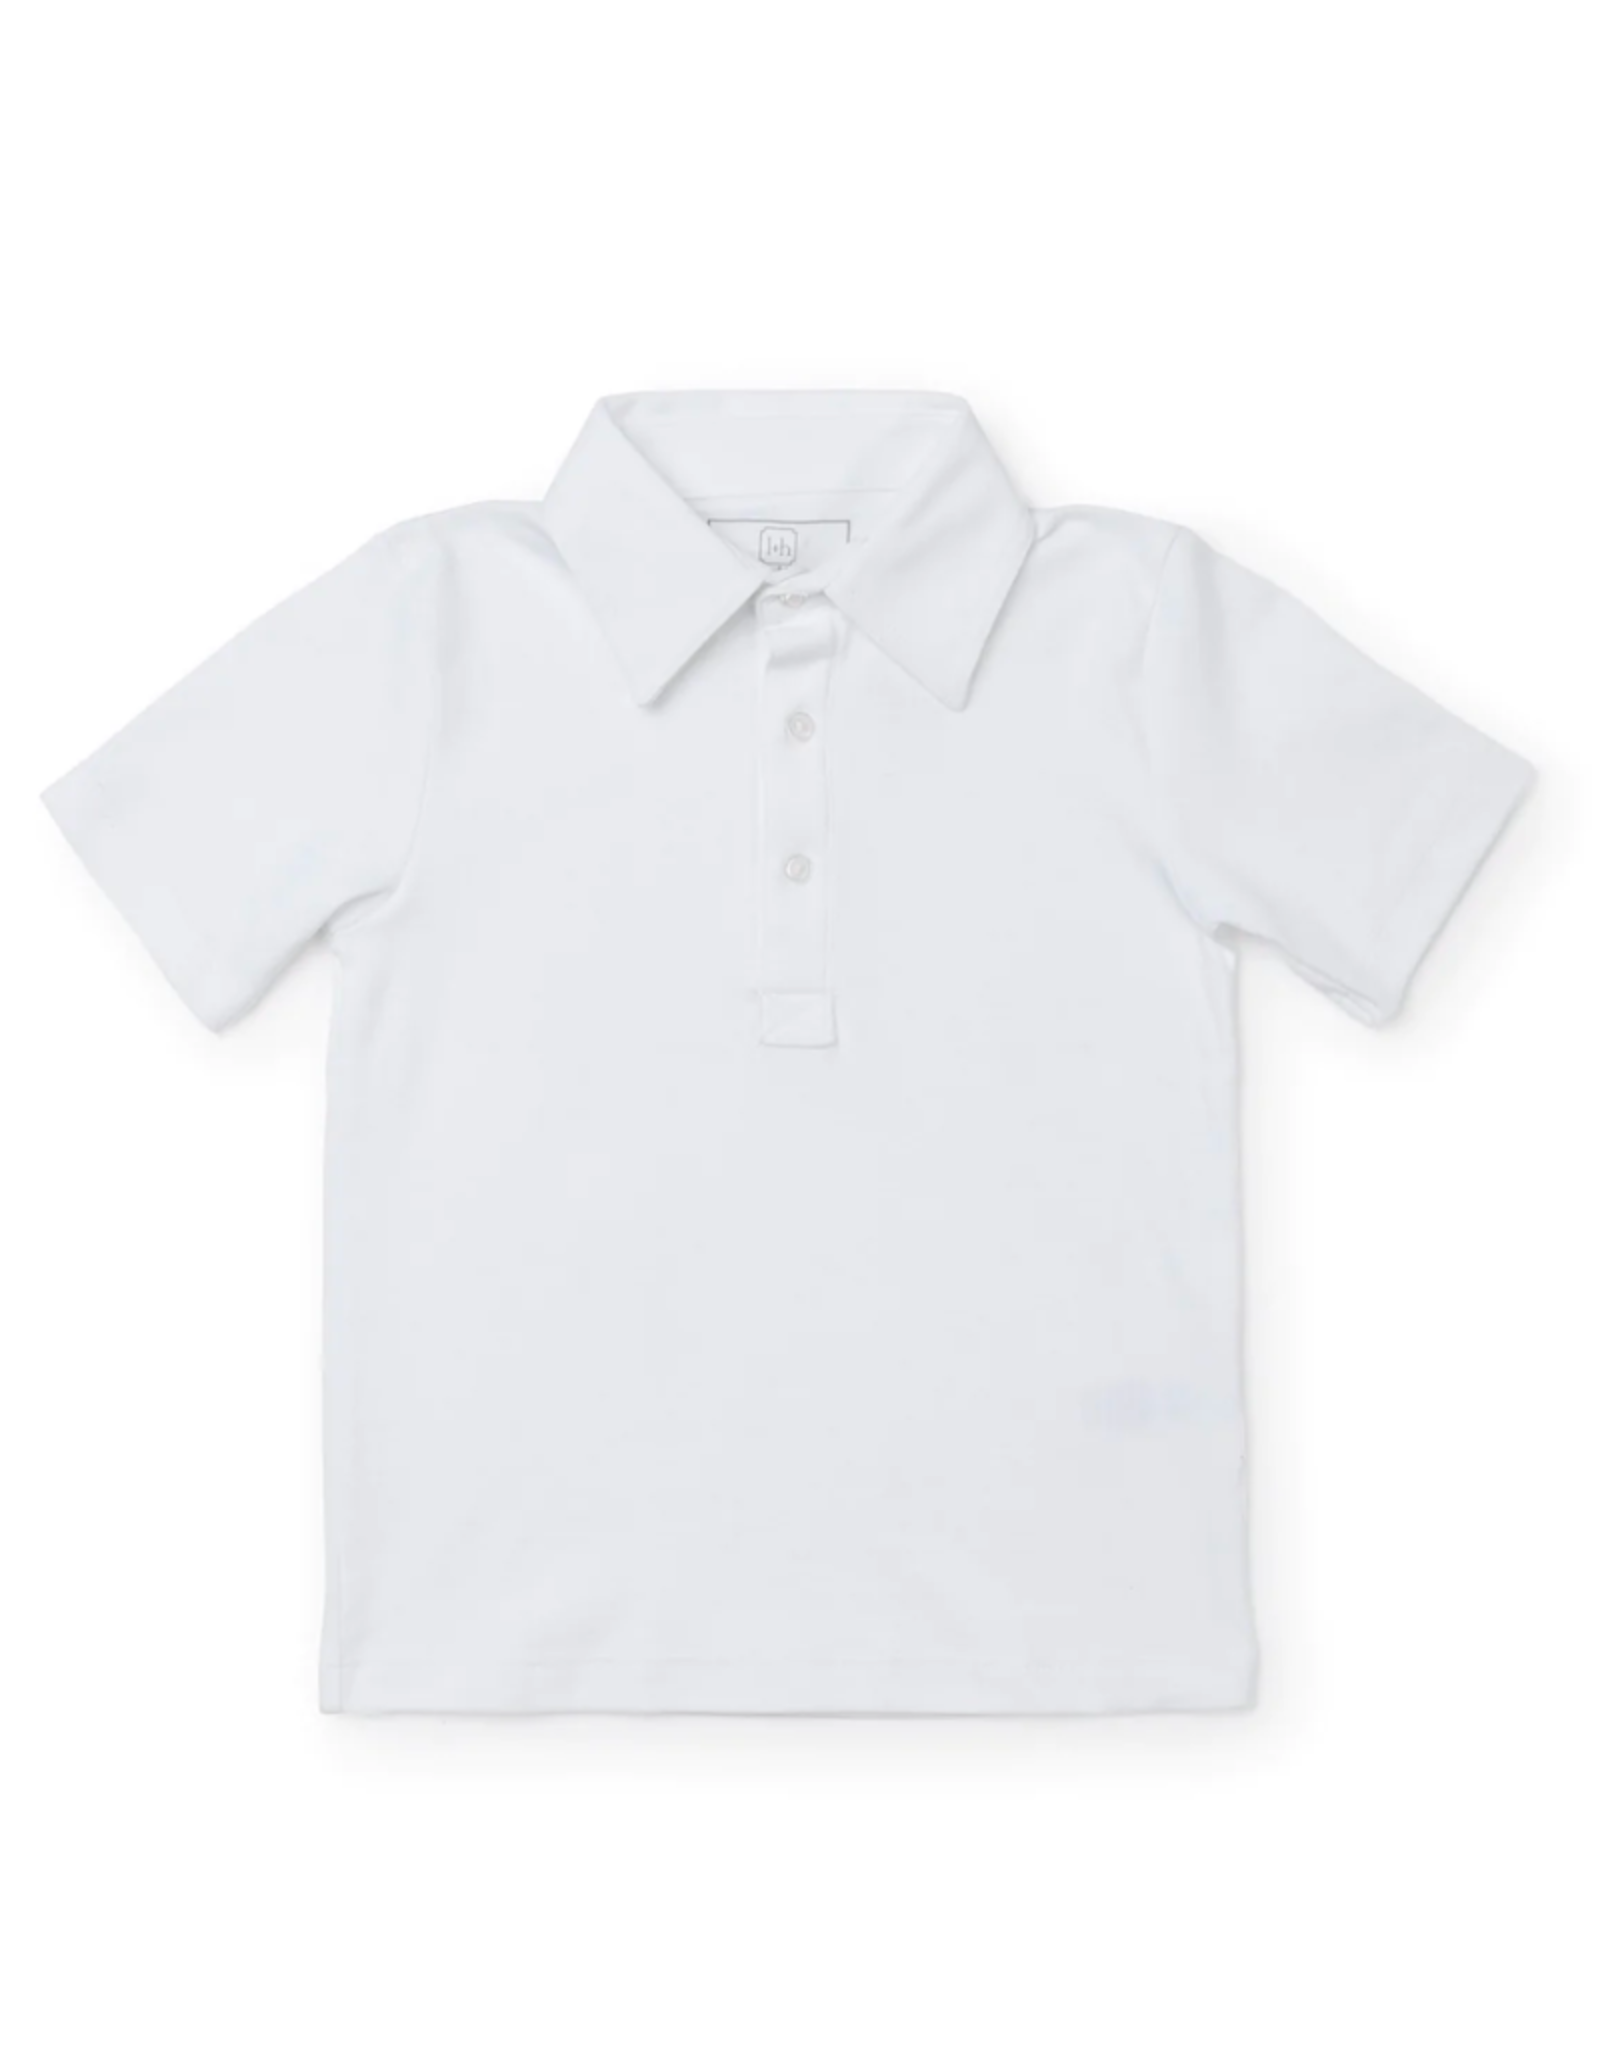 Lila + Hayes Griffin Polo Shirt White